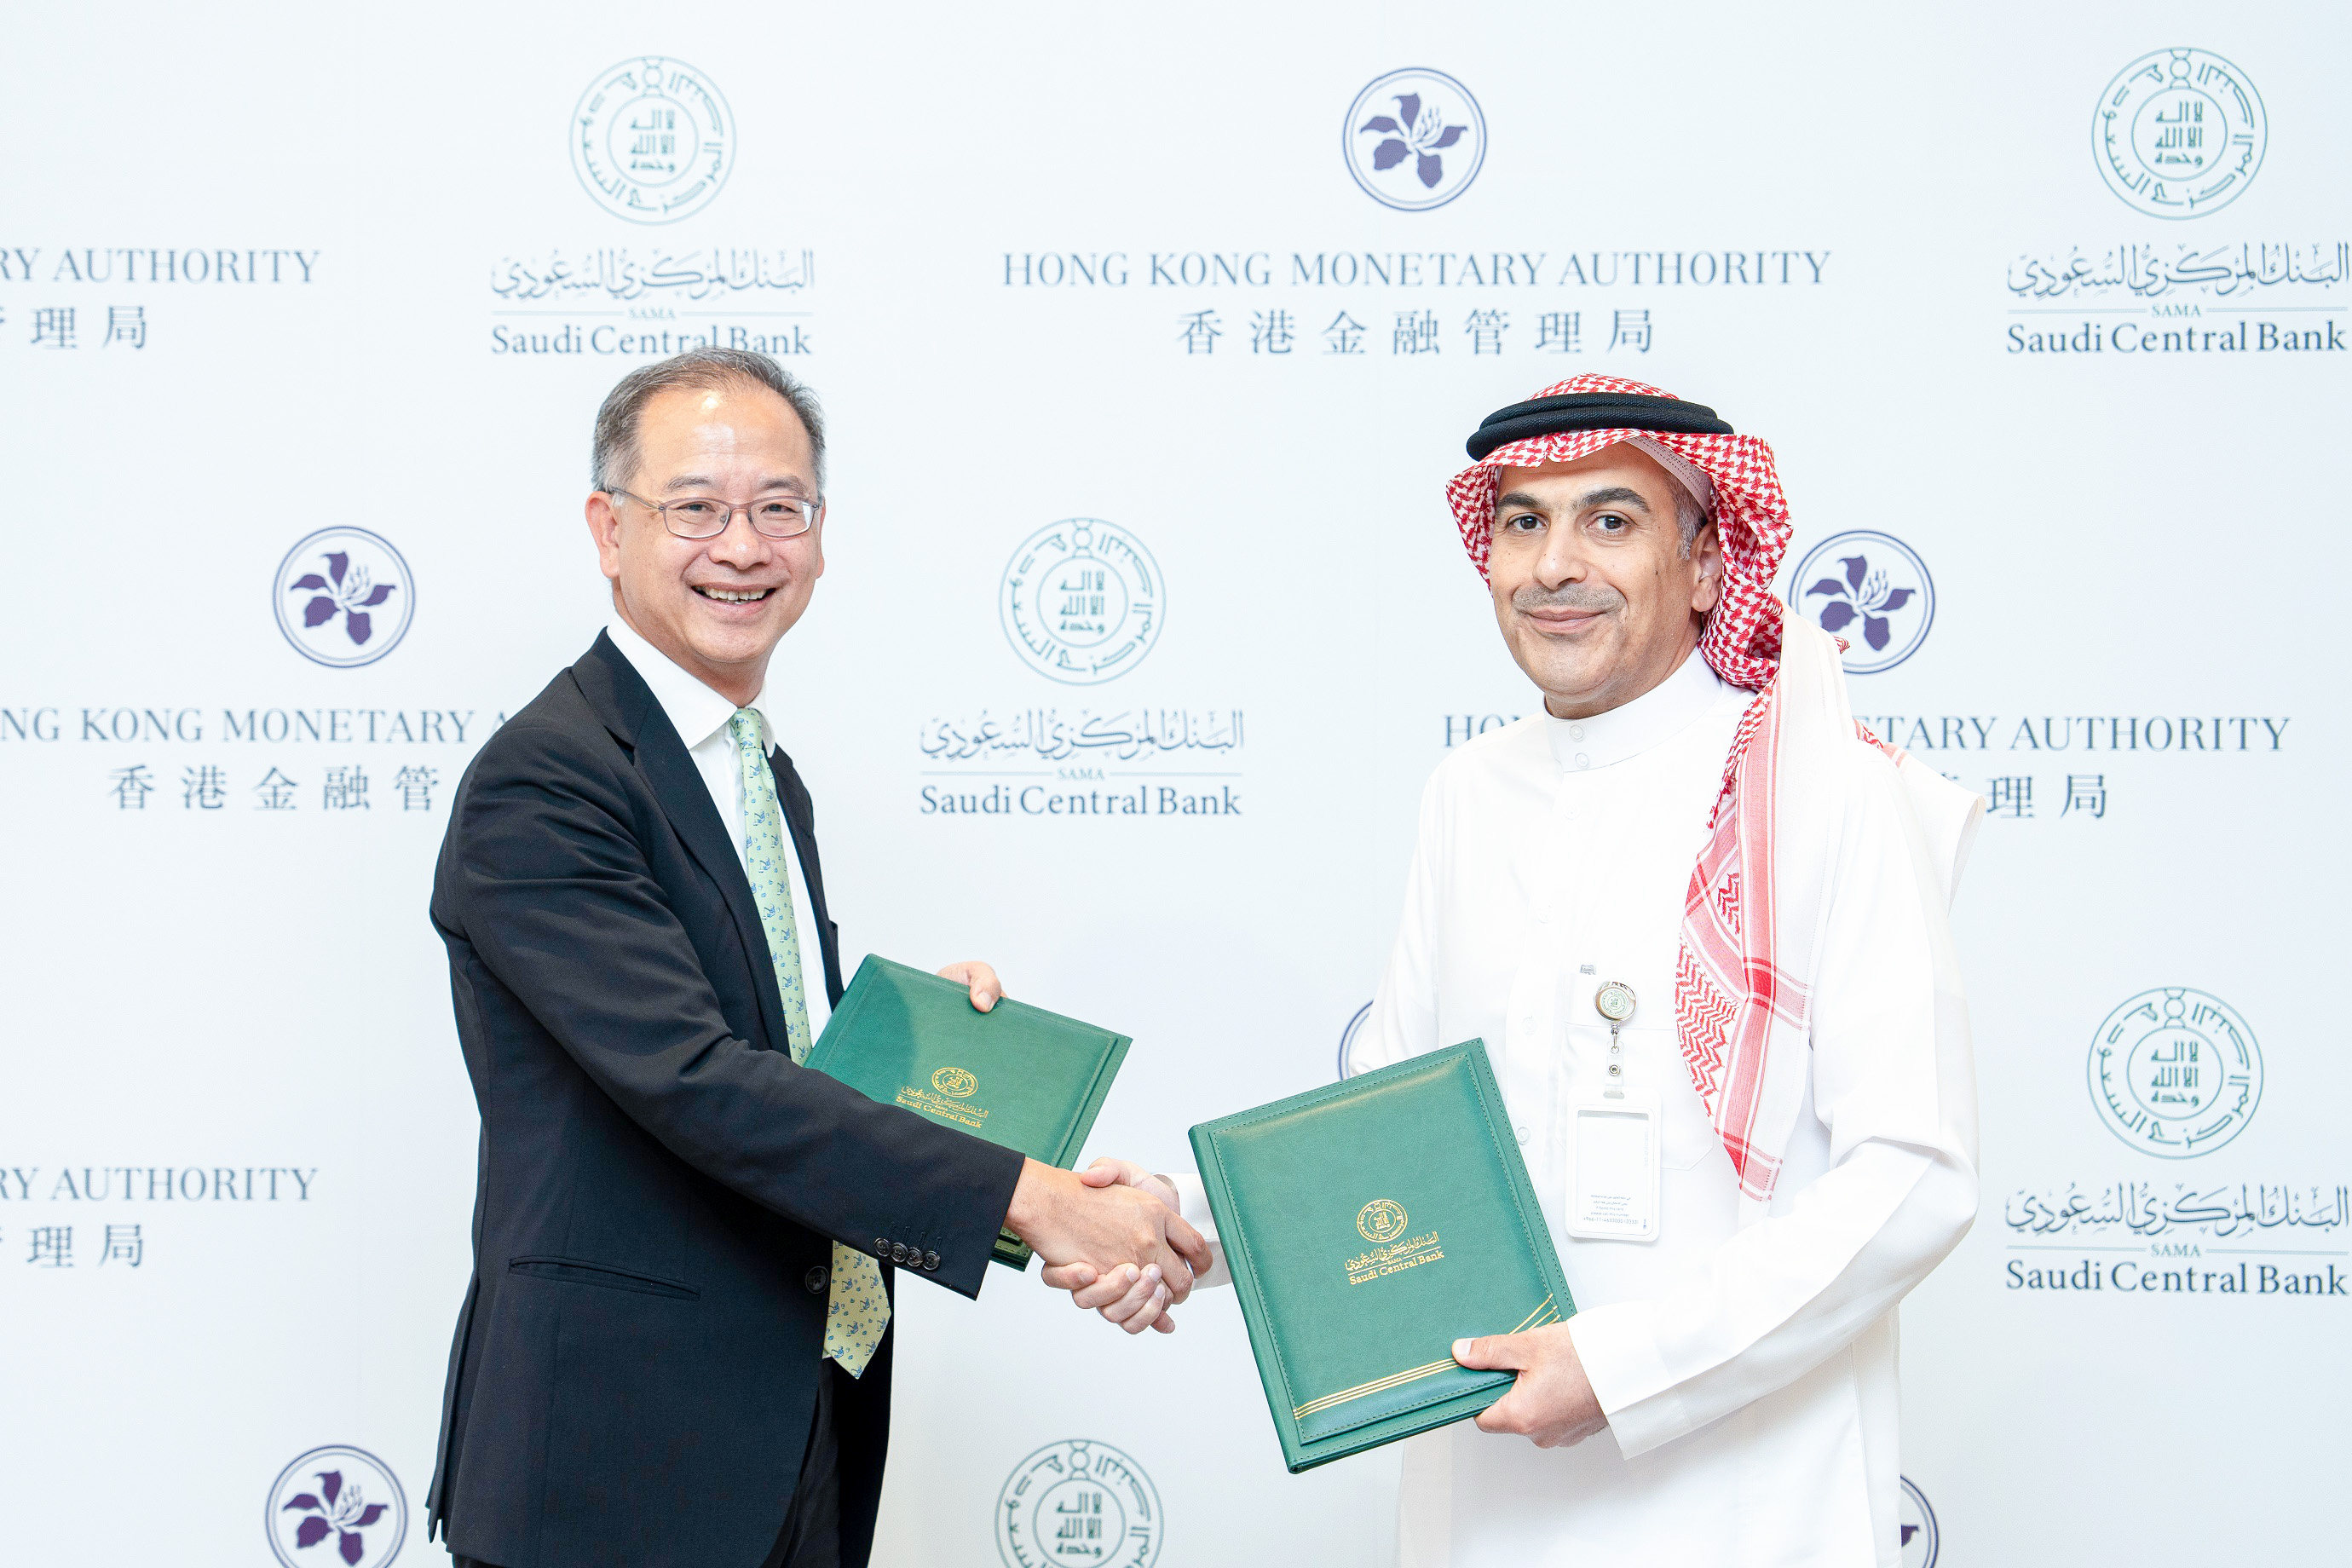 The Hong Kong Monetary Authority’s chief executive Eddie Yue Wai-man (left) and the Saudi Central Bank’s governor Ayman Al-Sayari (right) signed a Memorandum of Understanding on 26 July in Riyadh to promote collaboration on financial innovation. Photo: Handout/HKMA